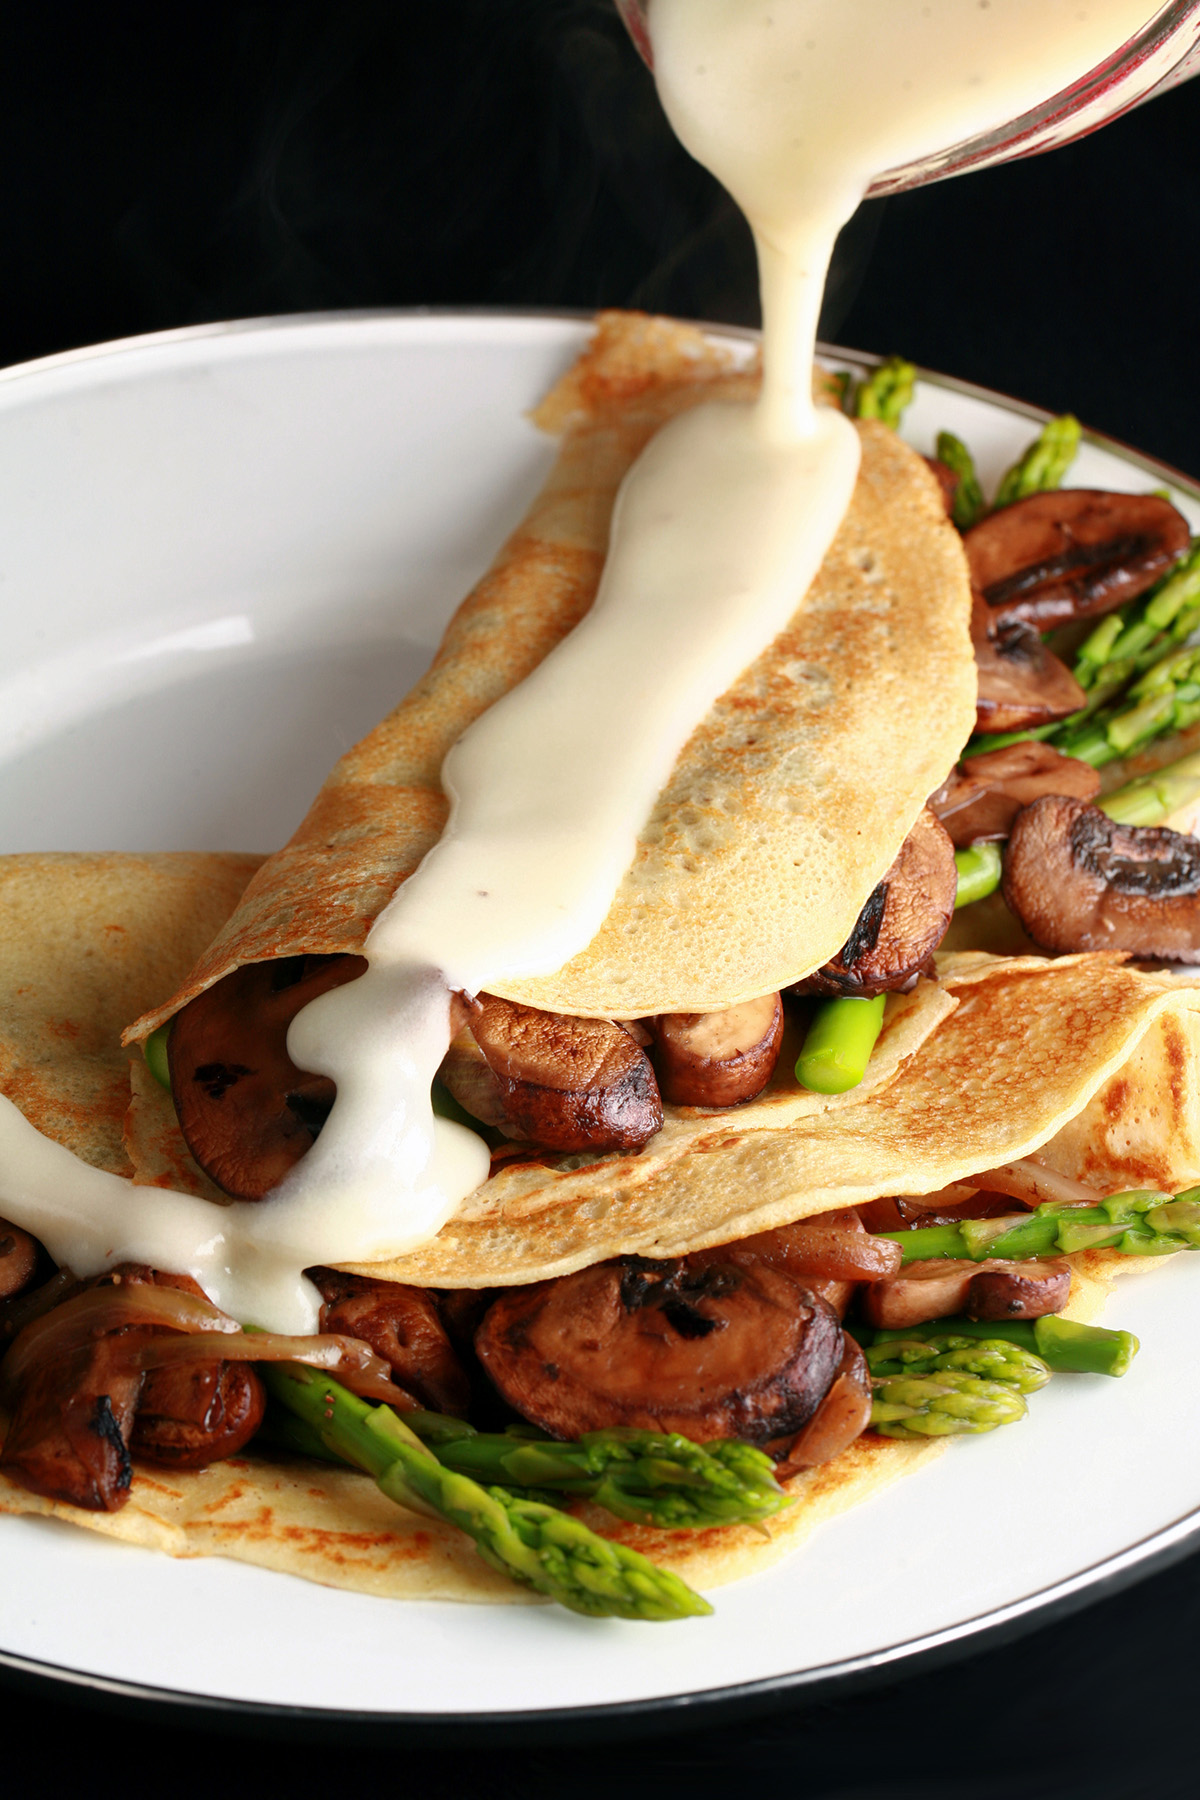 Two gluten free crepes stuffed with mushrooms and aspagus, drizzled with Swiss cheese sauce.